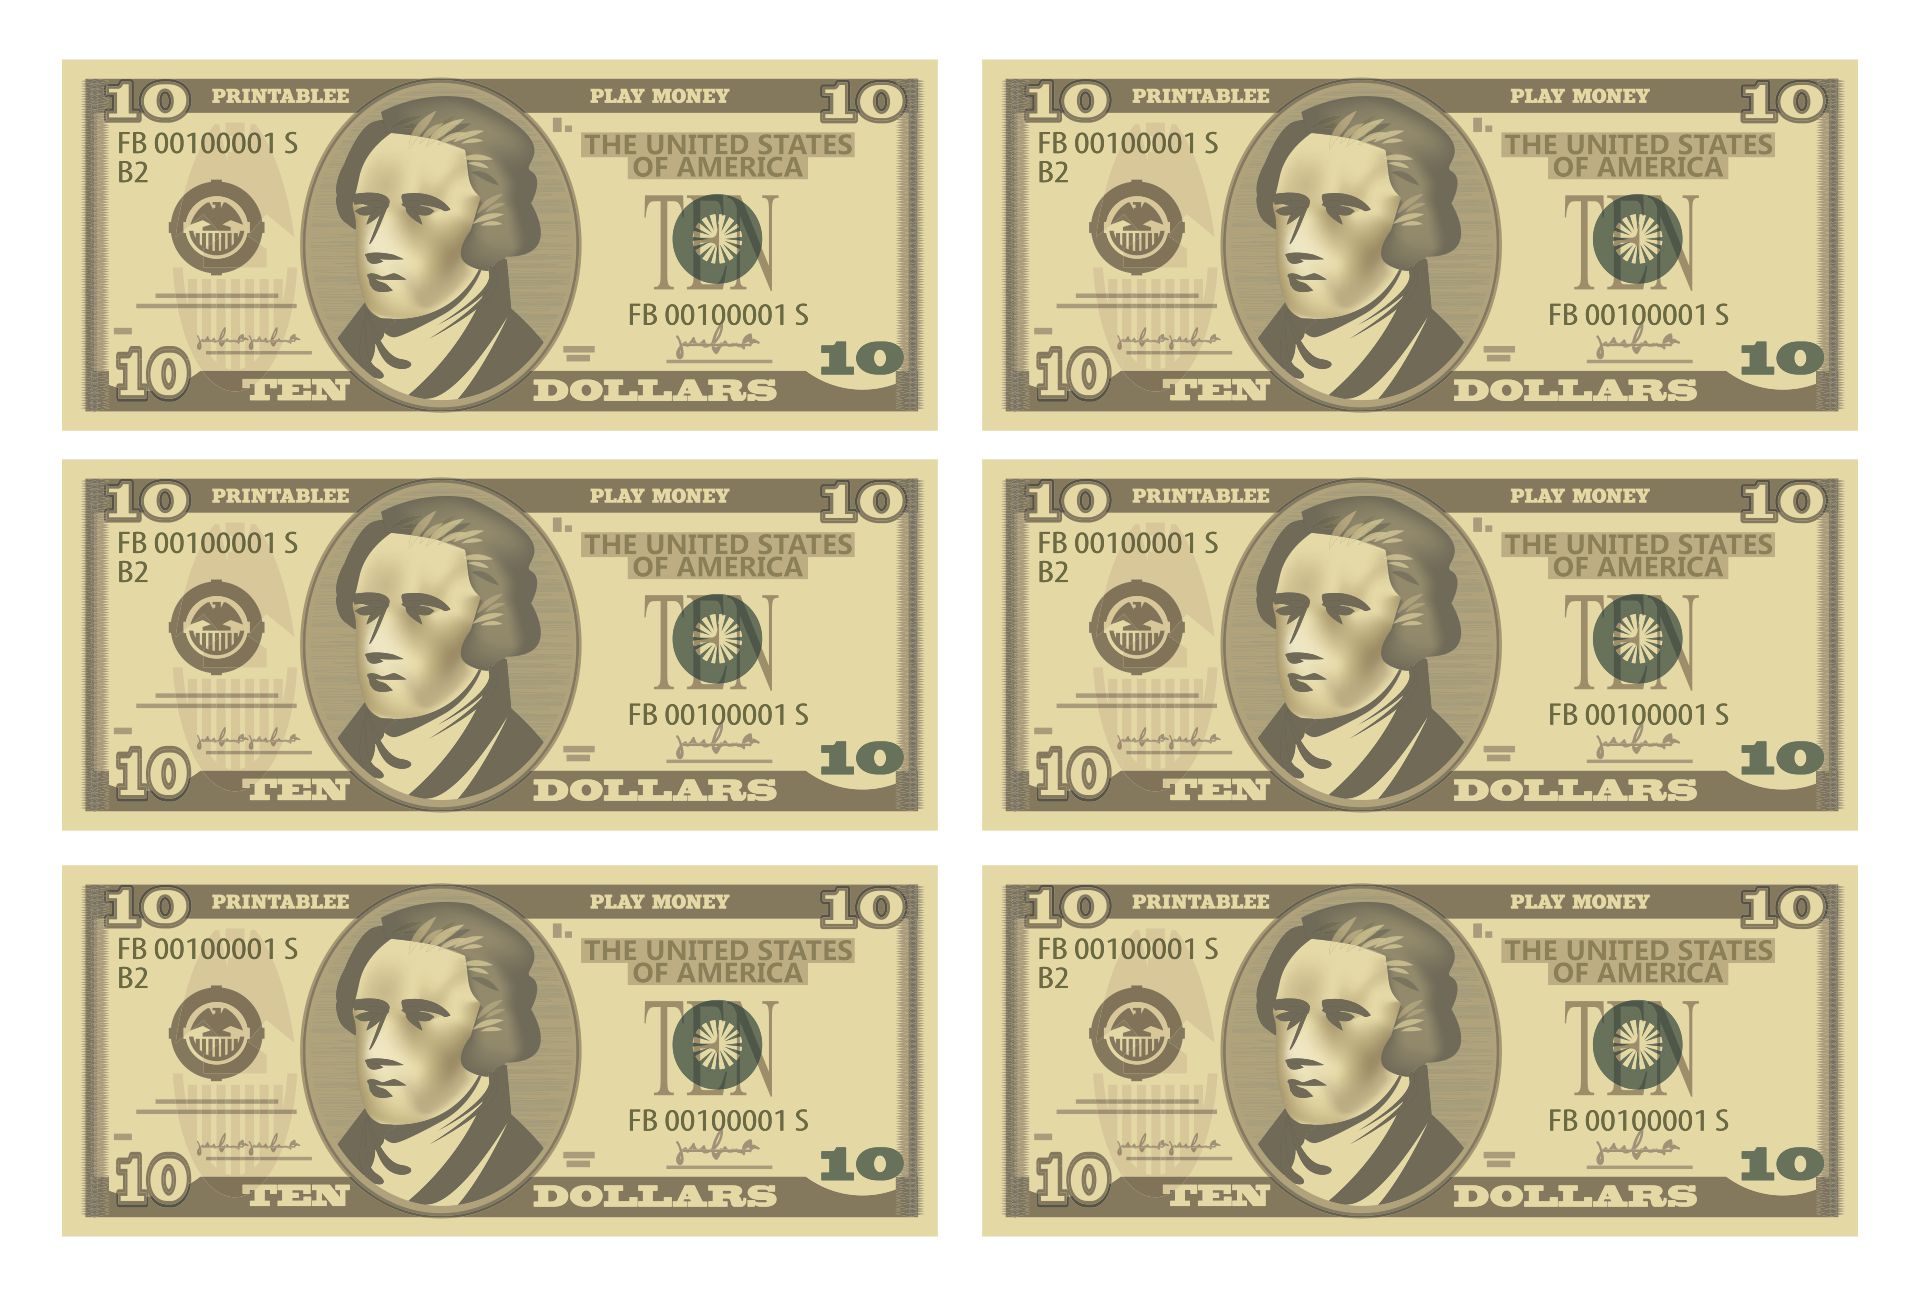 8-best-images-of-printable-phony-money-printable-fake-money-template